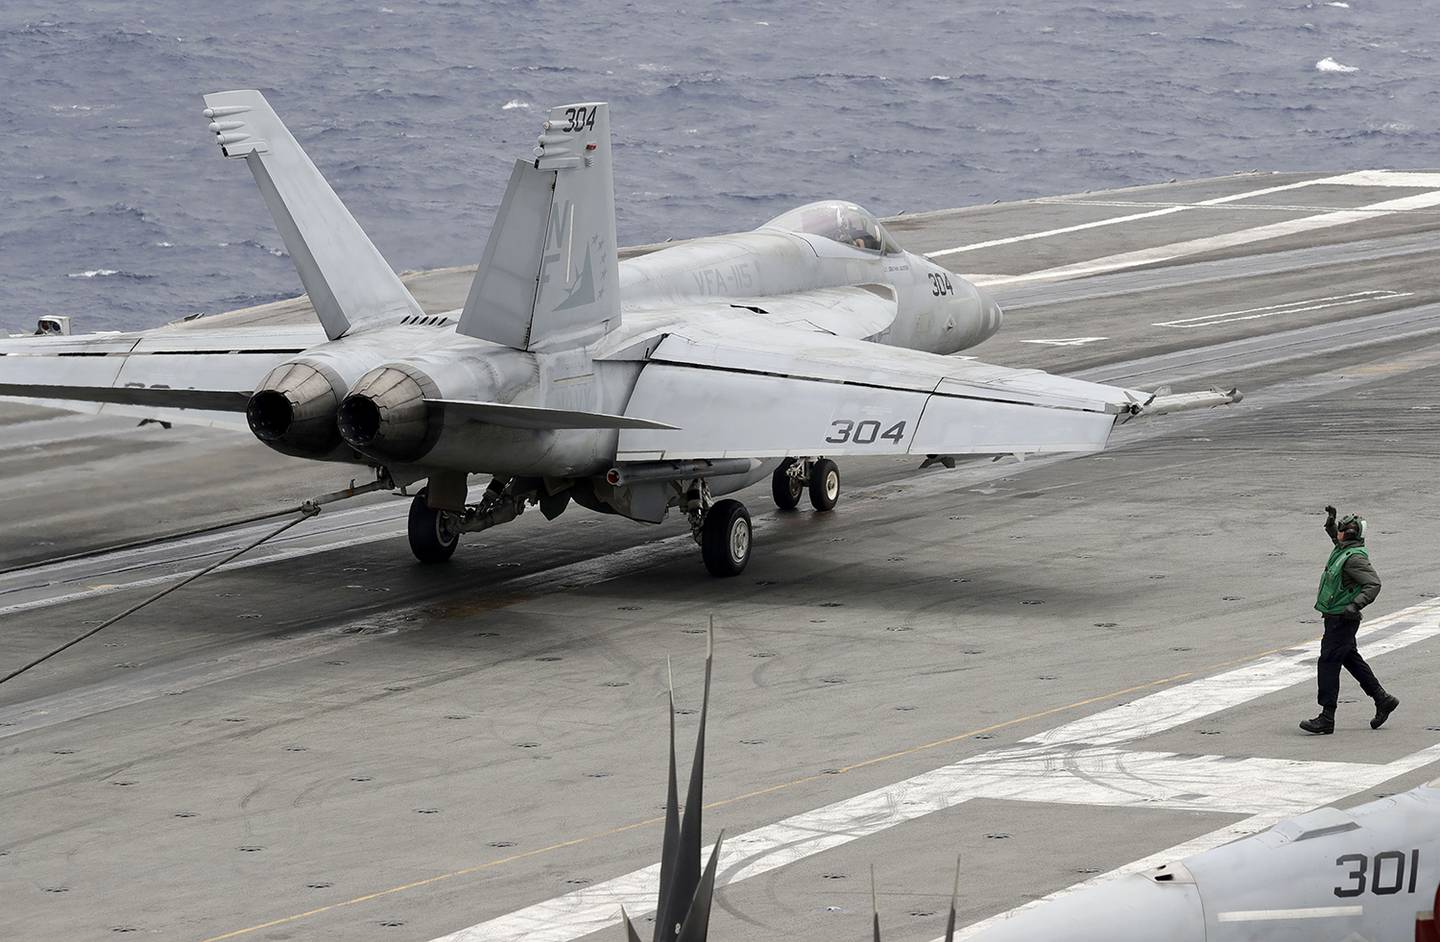 A U.S. fighter jet lands on the U.S. aircraft carrier USS Ronald Reagan following their patrol at the international waters off South China Sea Tuesday, Aug. 6, 2019.